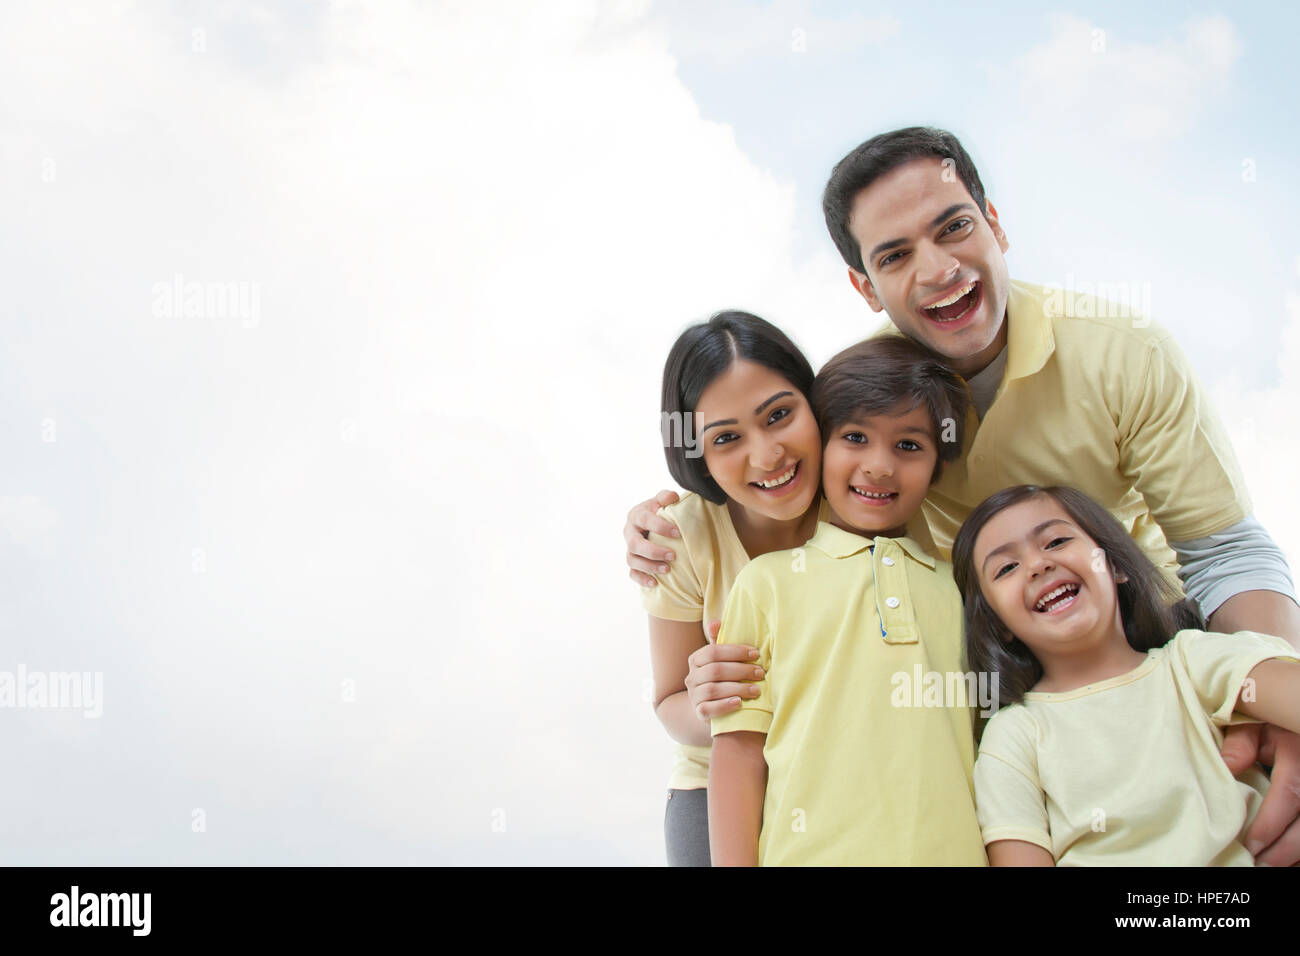 Happy young family against the clear sky Stock Photo